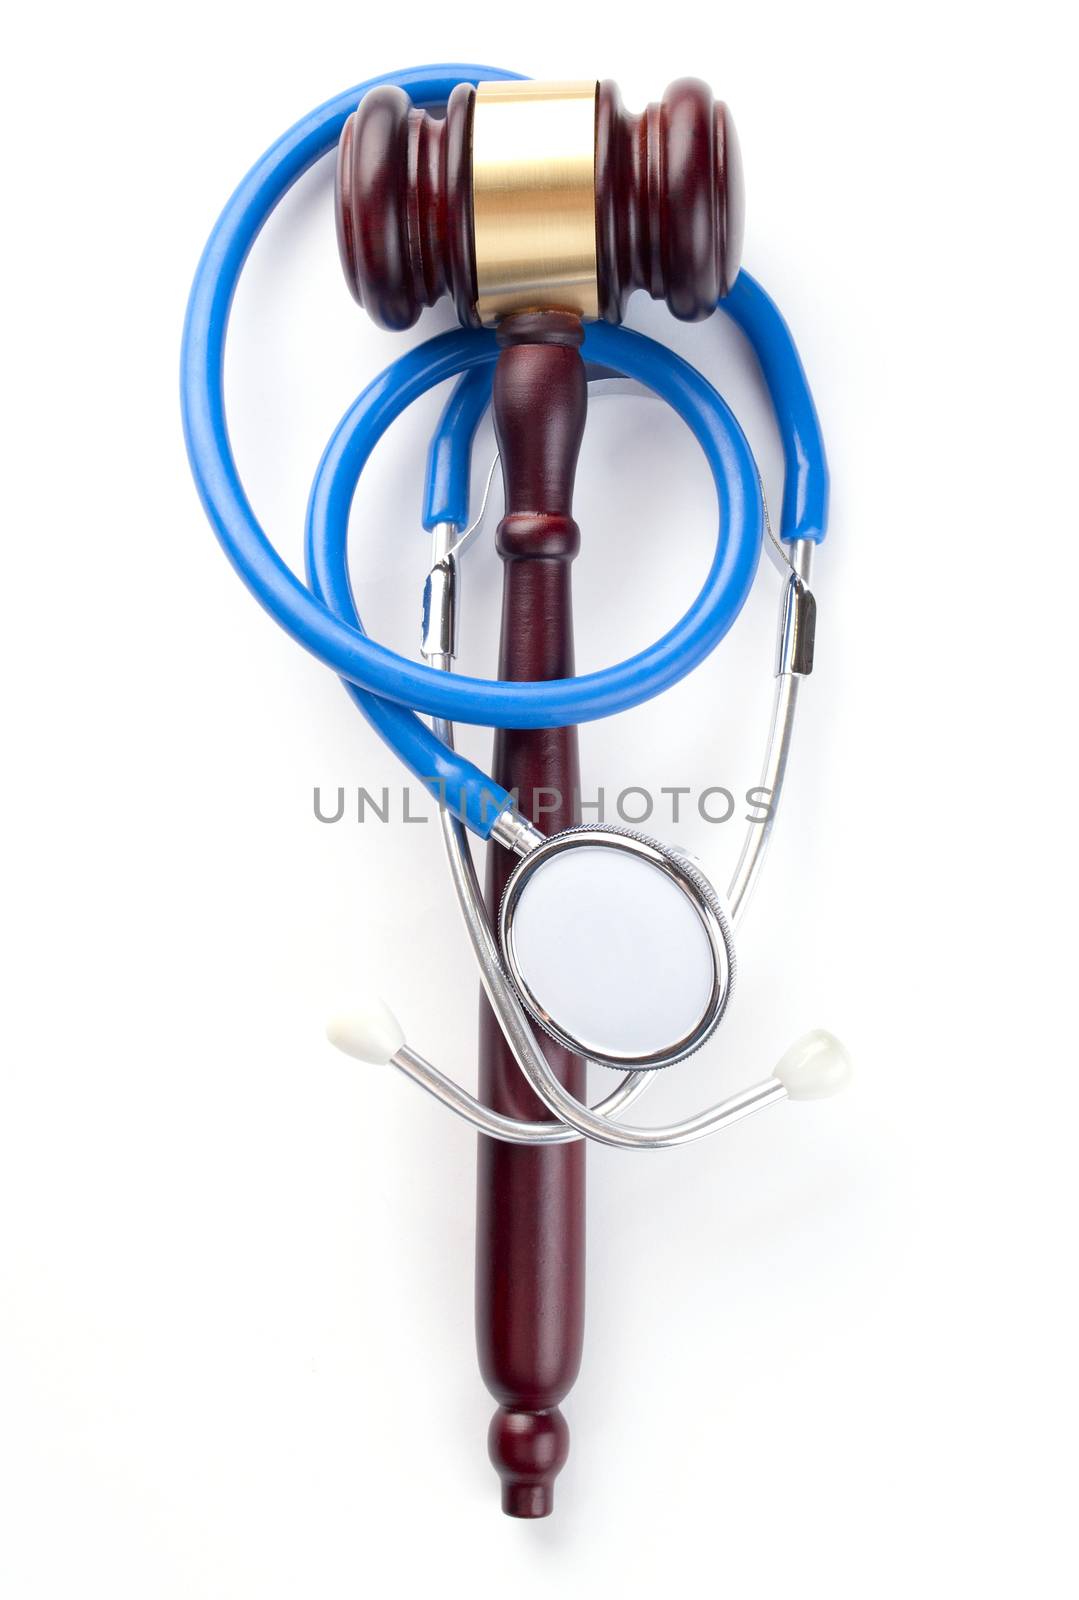 brown gavel and a medical stethoscope on white background